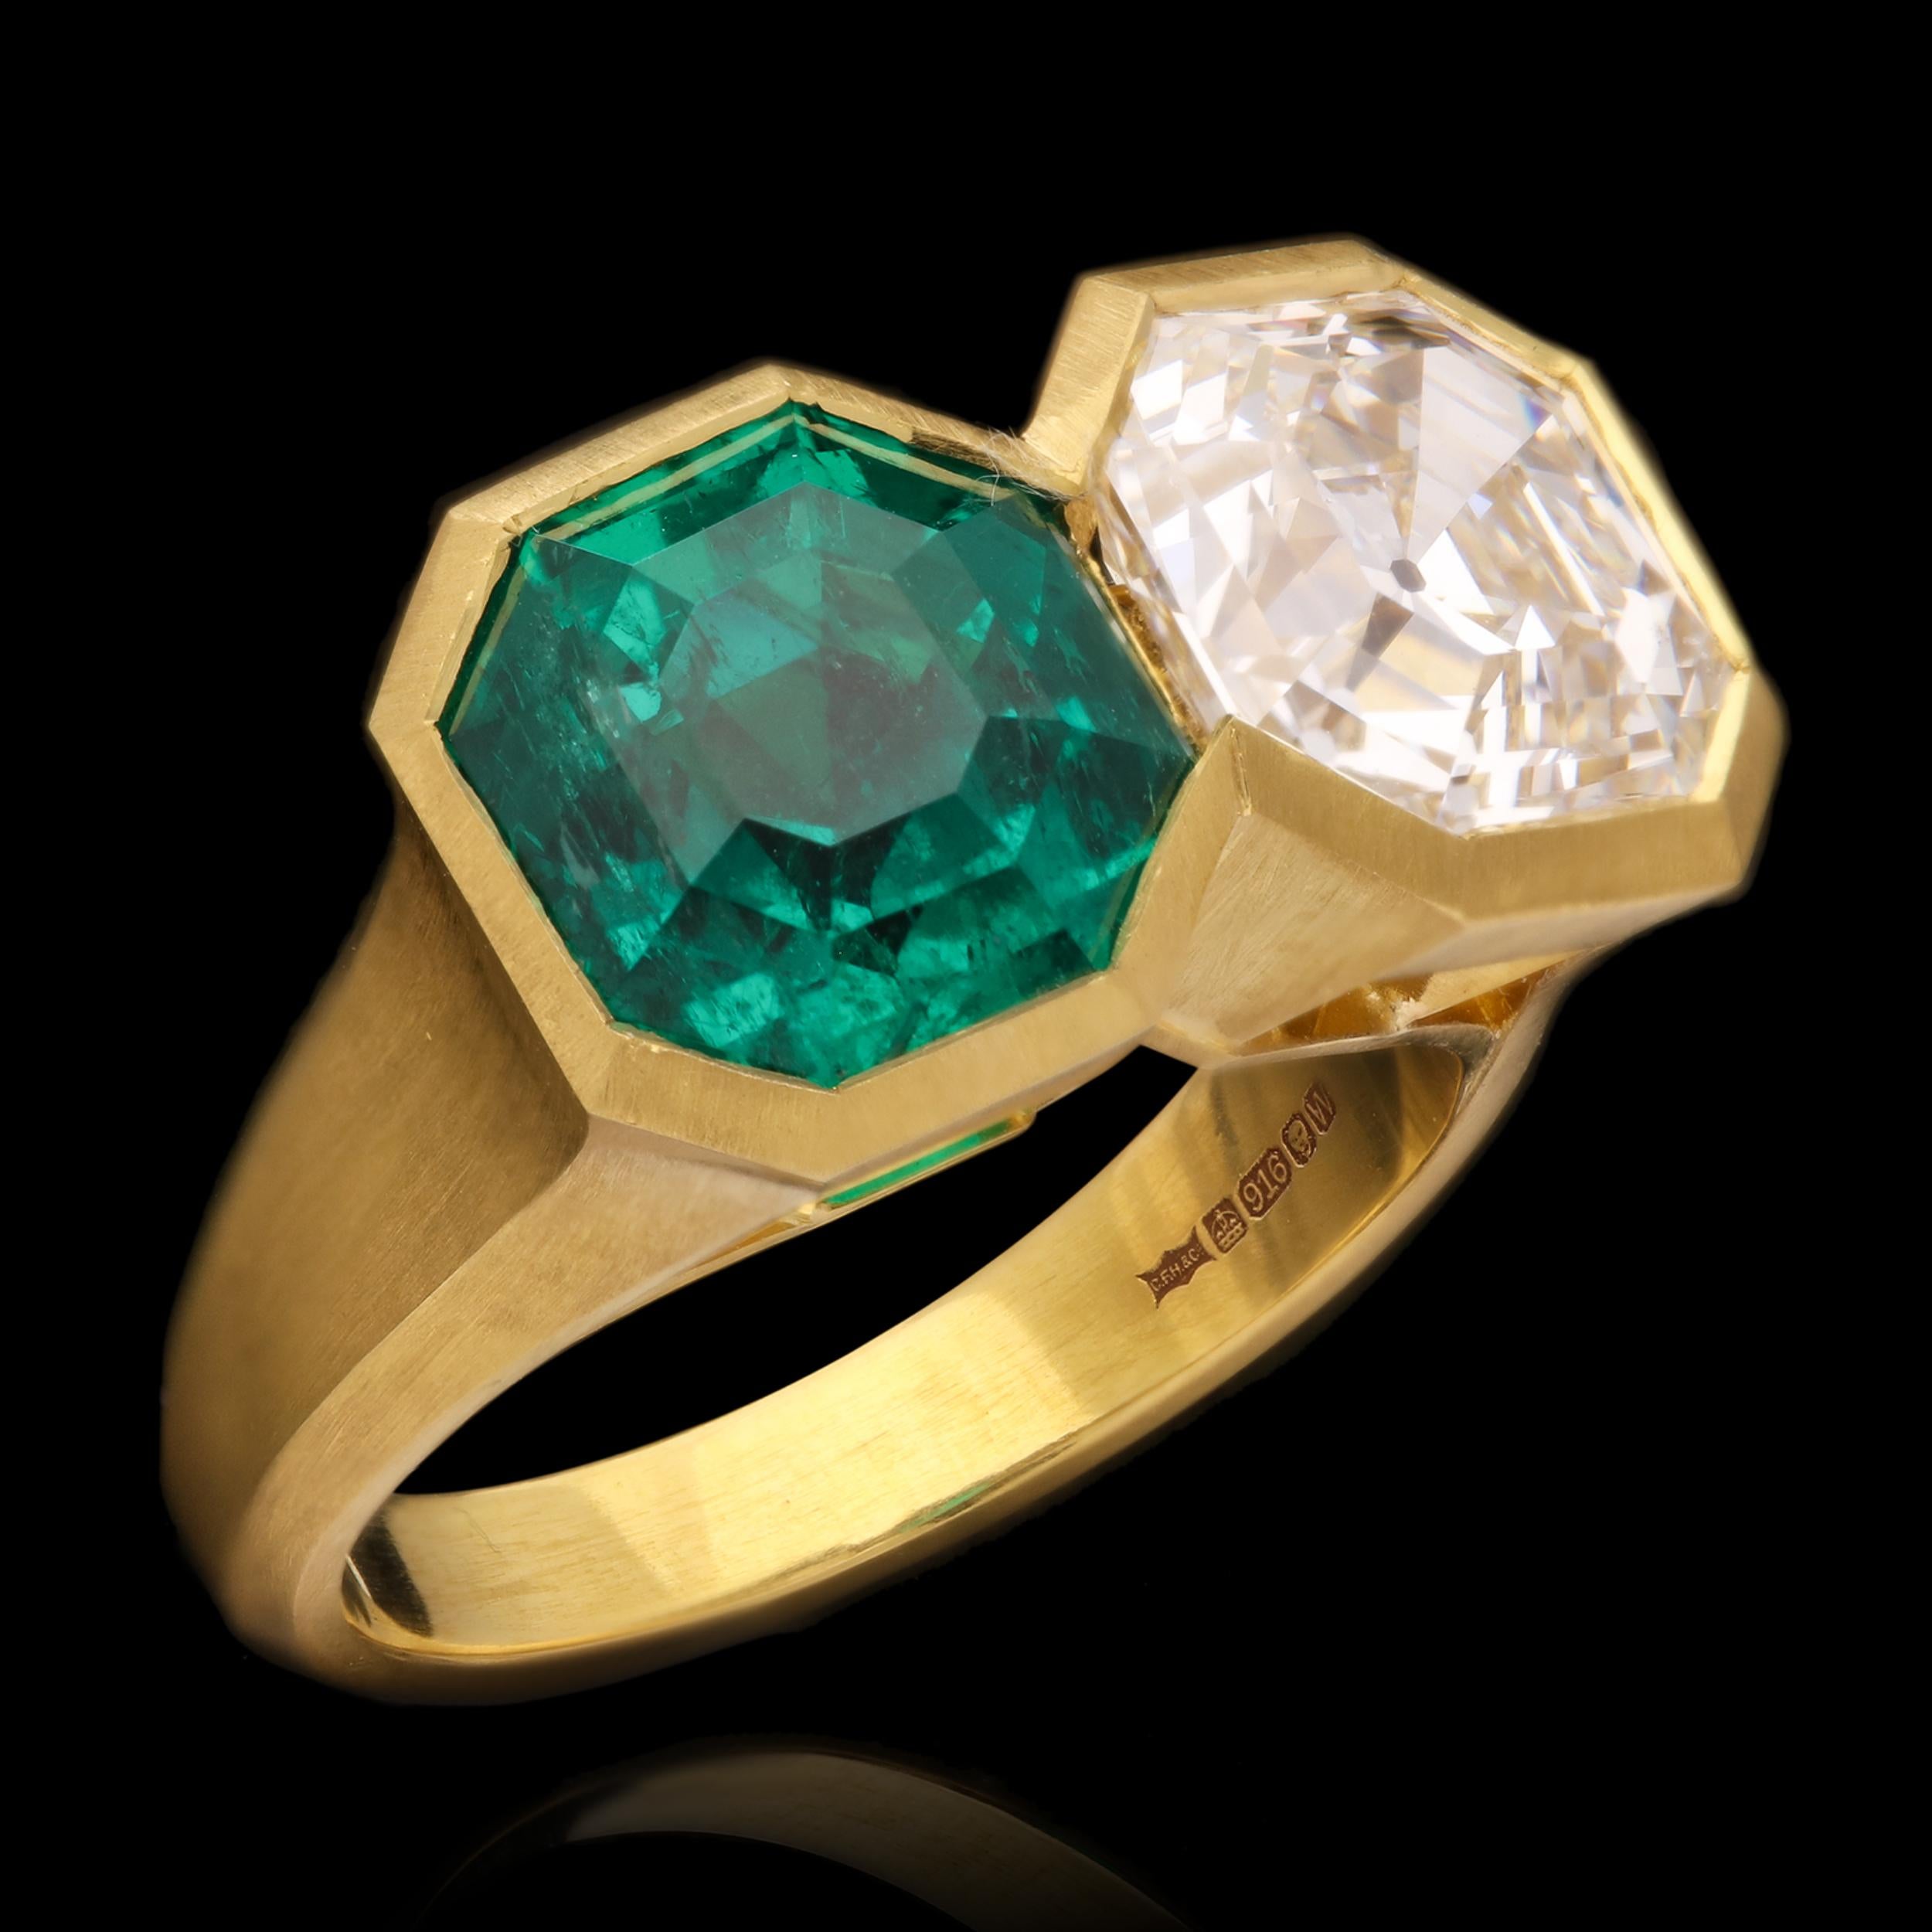 A stunning emerald and diamond two stone ring by Hancocks, set side by side with an Asscher cut diamond weighing 3.70ct and of F colour and SI1 clarity and an octagonal step cut Colombian emerald weighing 4.08ct, both in rubover settings with